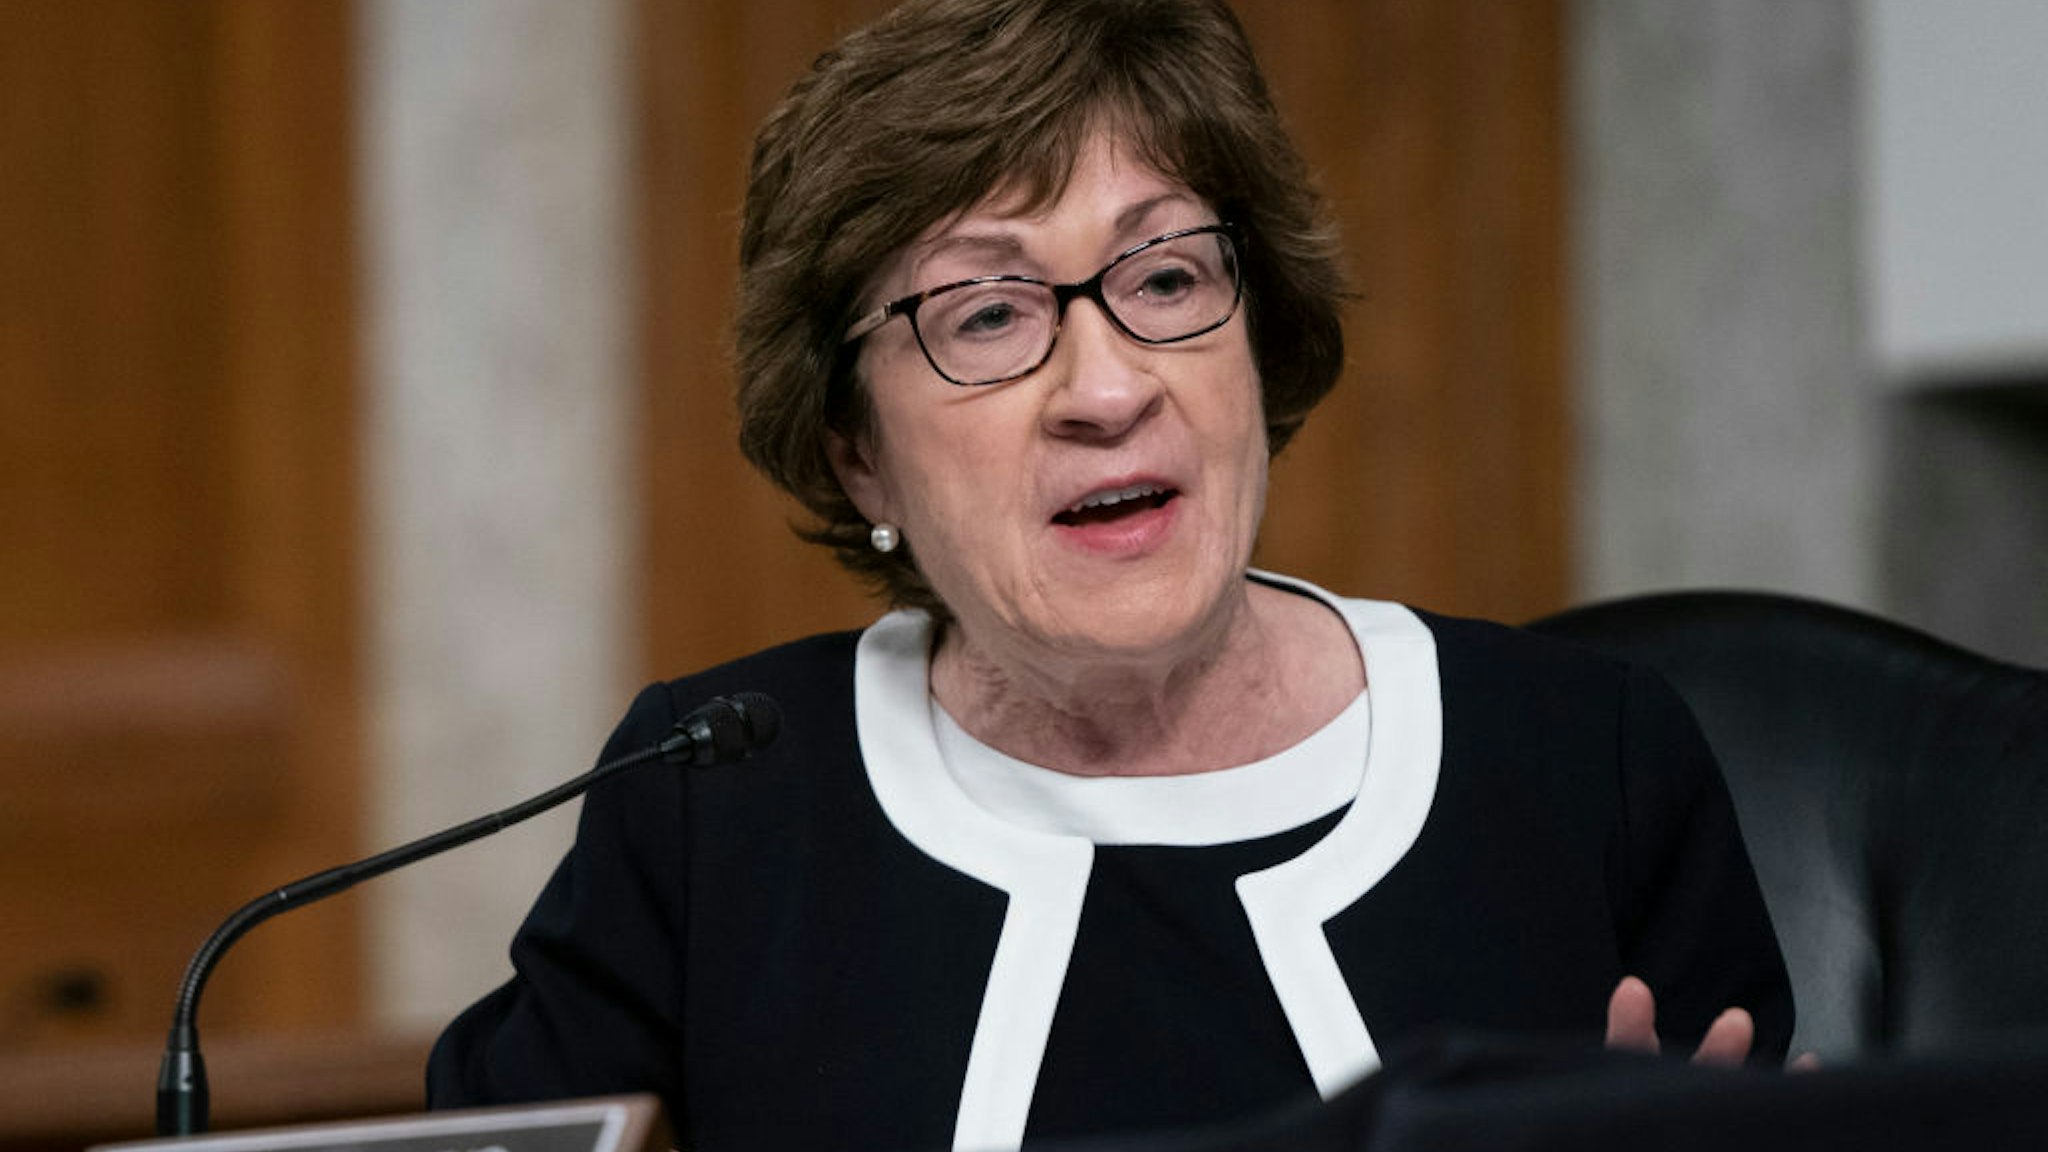 U.S. Sen. Susan Collins (R-ME) speaks at a hearing of the Senate Health, Education, Labor and Pensions Committee on September 23, 2020 in Washington, DC.